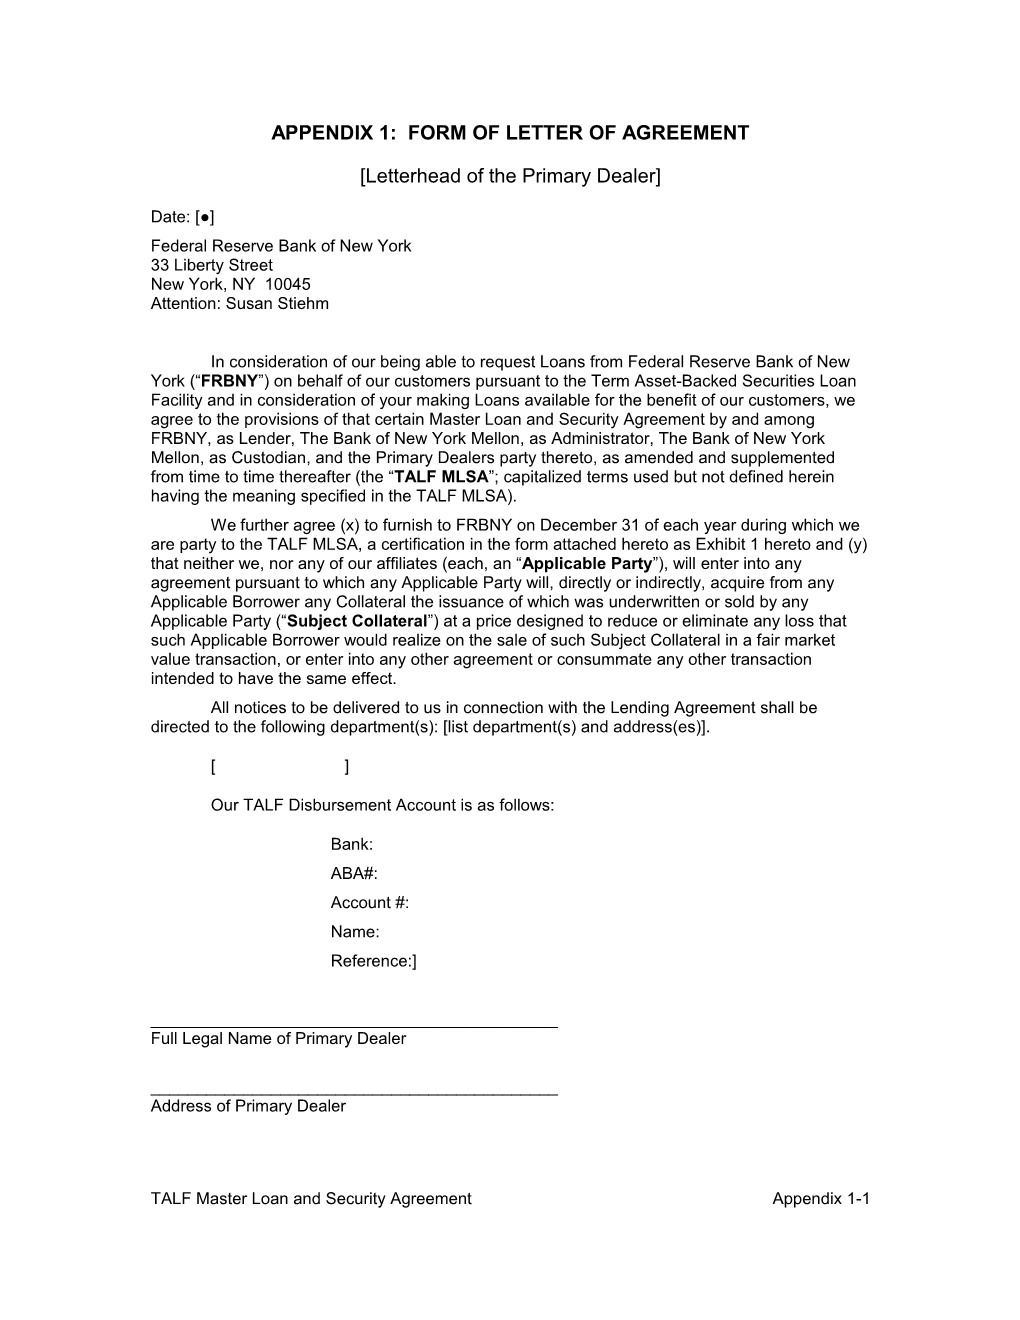 Appendix 1: Form of Letter of Agreement